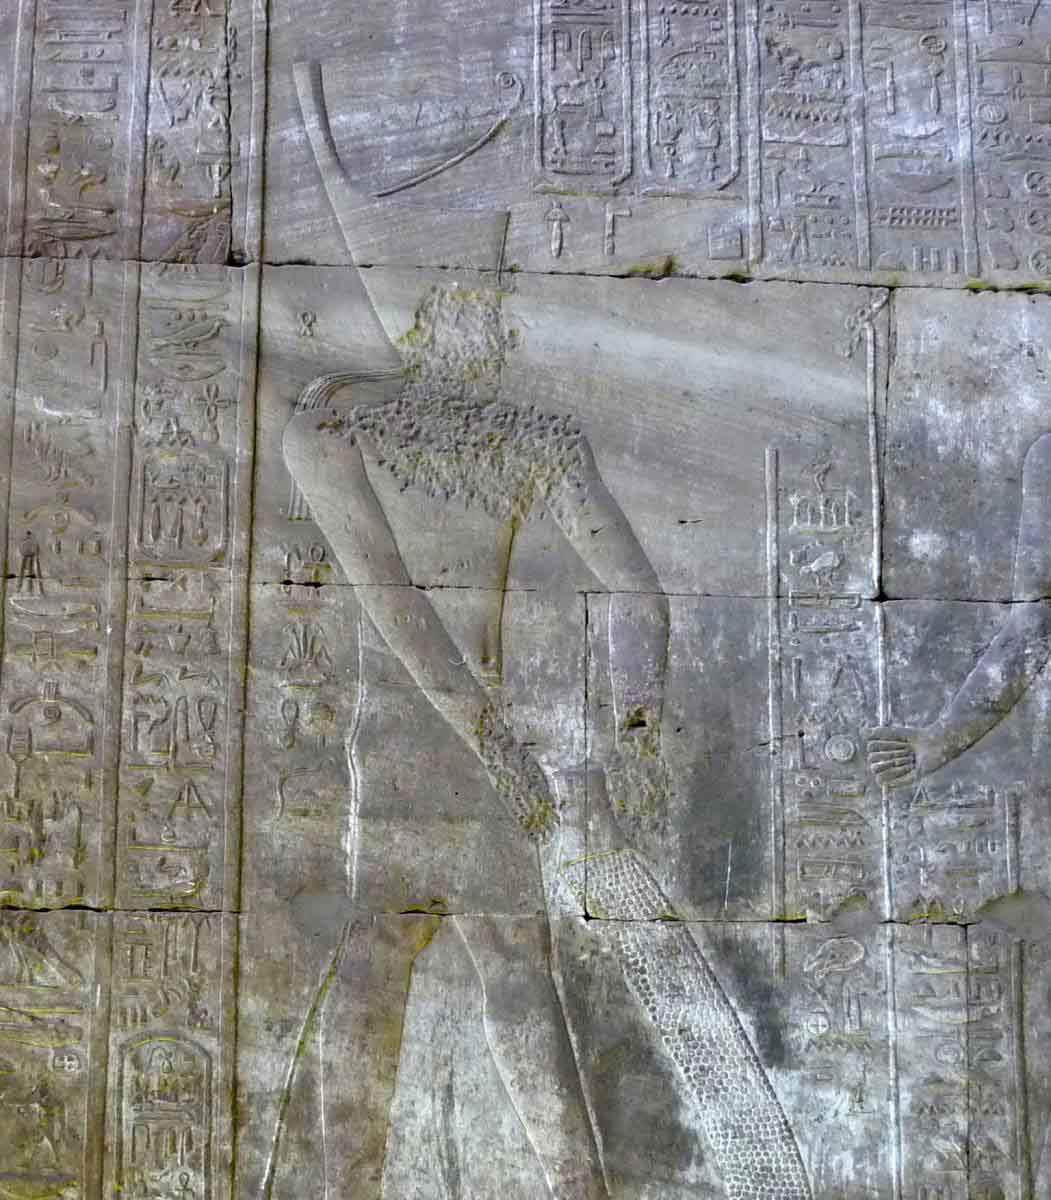 Ancient Egyptians may have used water and wet sand to move heavy objects